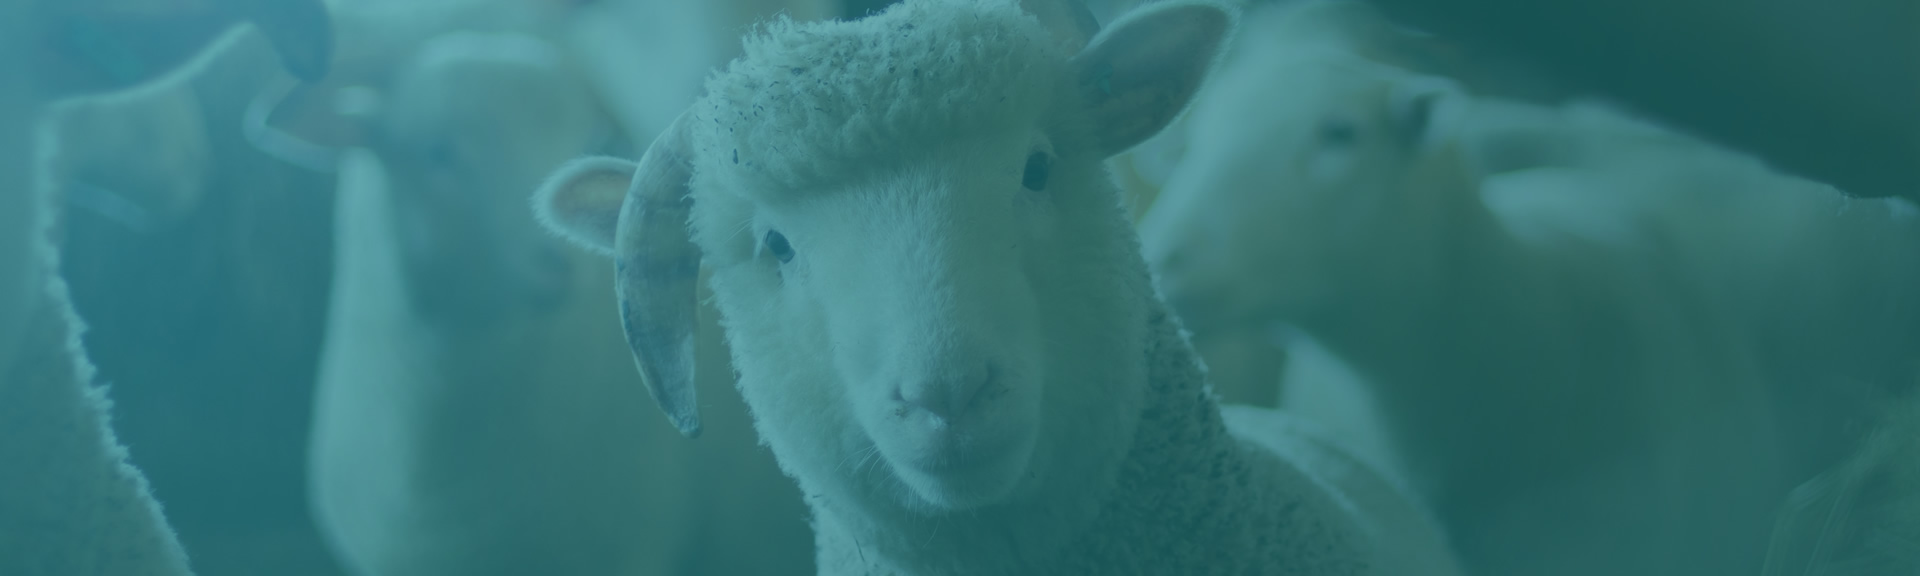 Pay Per Click Advertising Services - Sheep Headshot - Background Image | Digital C4